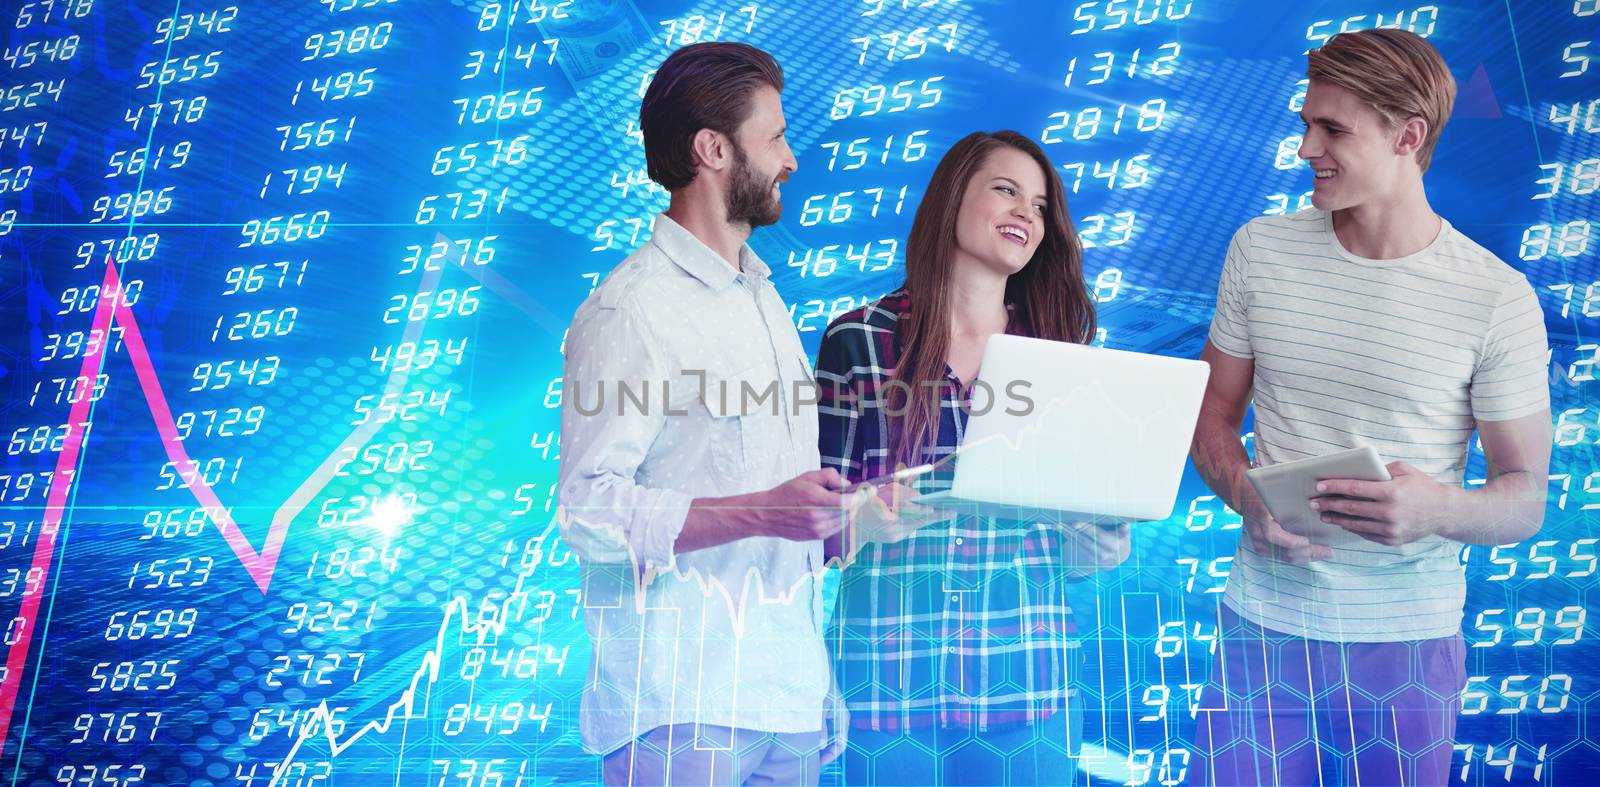 Business people using wireless technology while standing against white background against stocks and shares